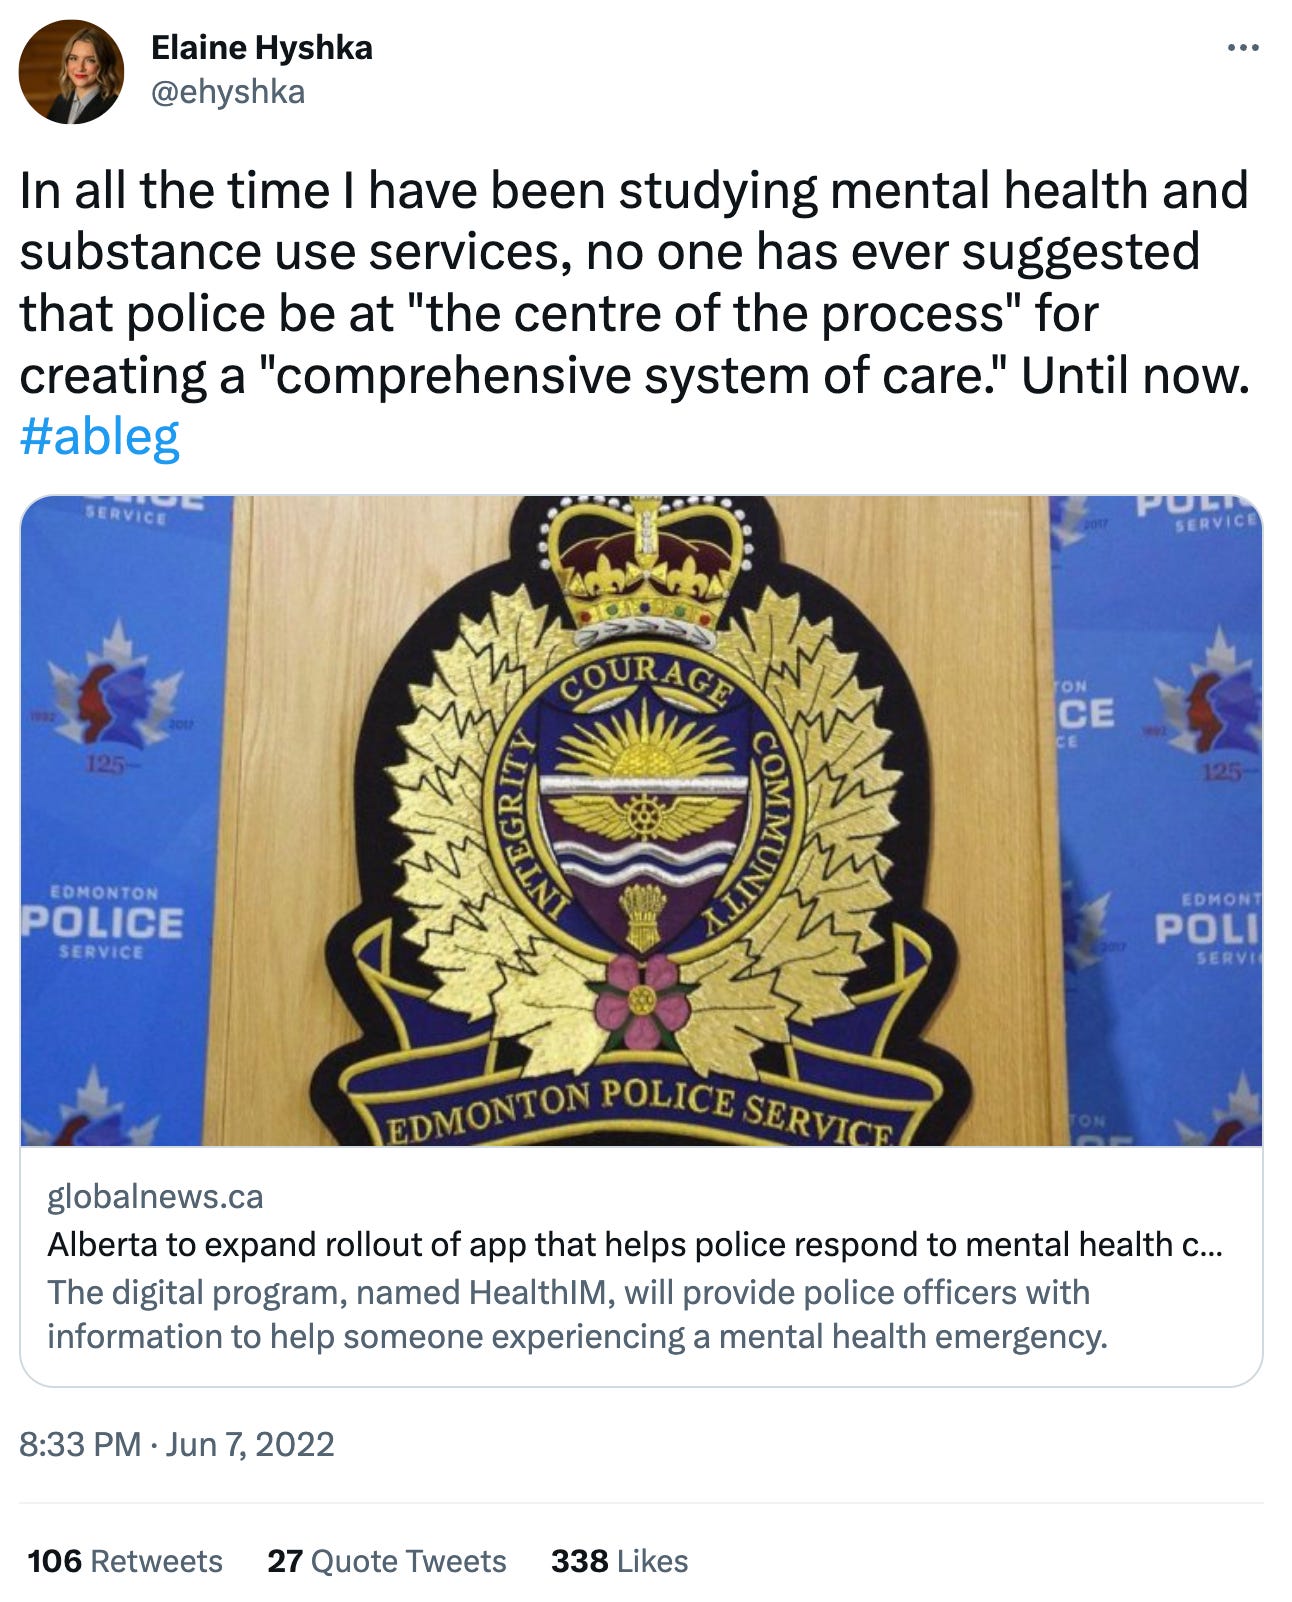 Tweet from Dr Elaine Hyshka of University of Alberta School of Public Health: In all the time I have been studying drug policy and substance use, I have never heard it asserted that police be at the centre of a process for creating a "comprehensive system of care". Until now.